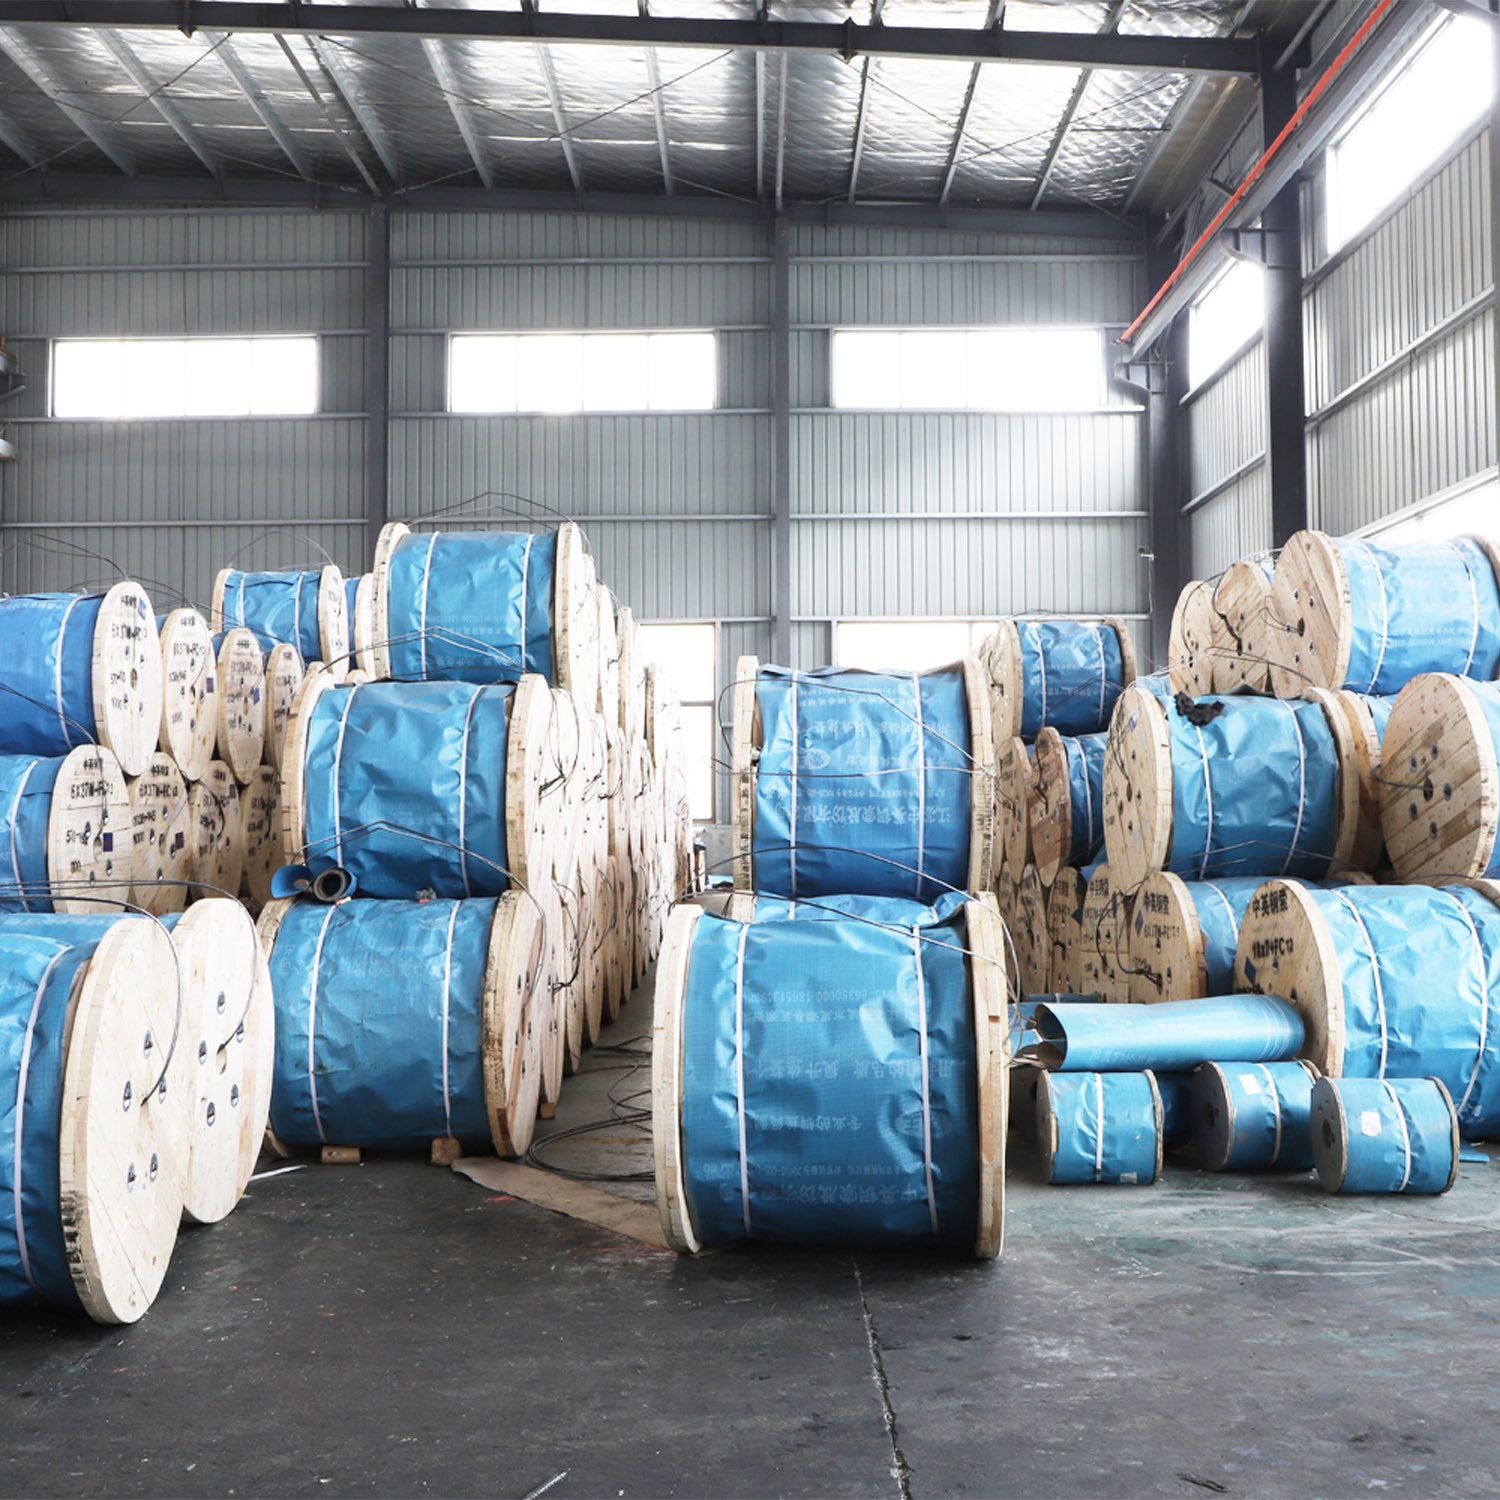 HDG 6*19+FC Steel Wire Rope Steel Cable